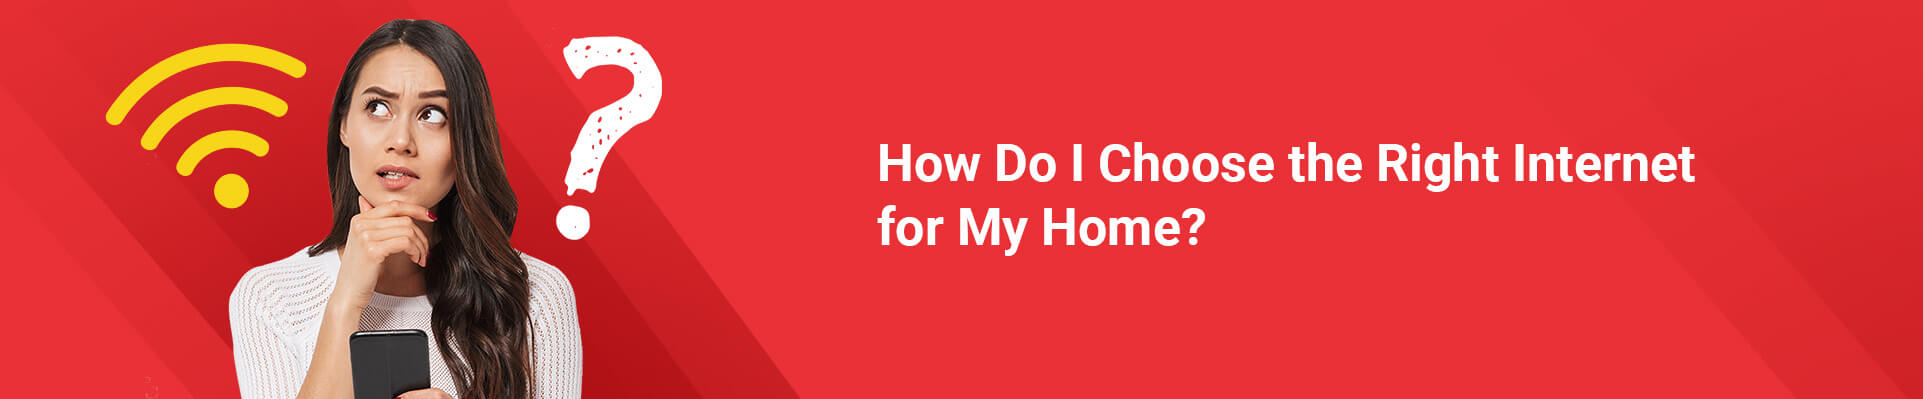 How Do I Choose the Right Internet for My Home?